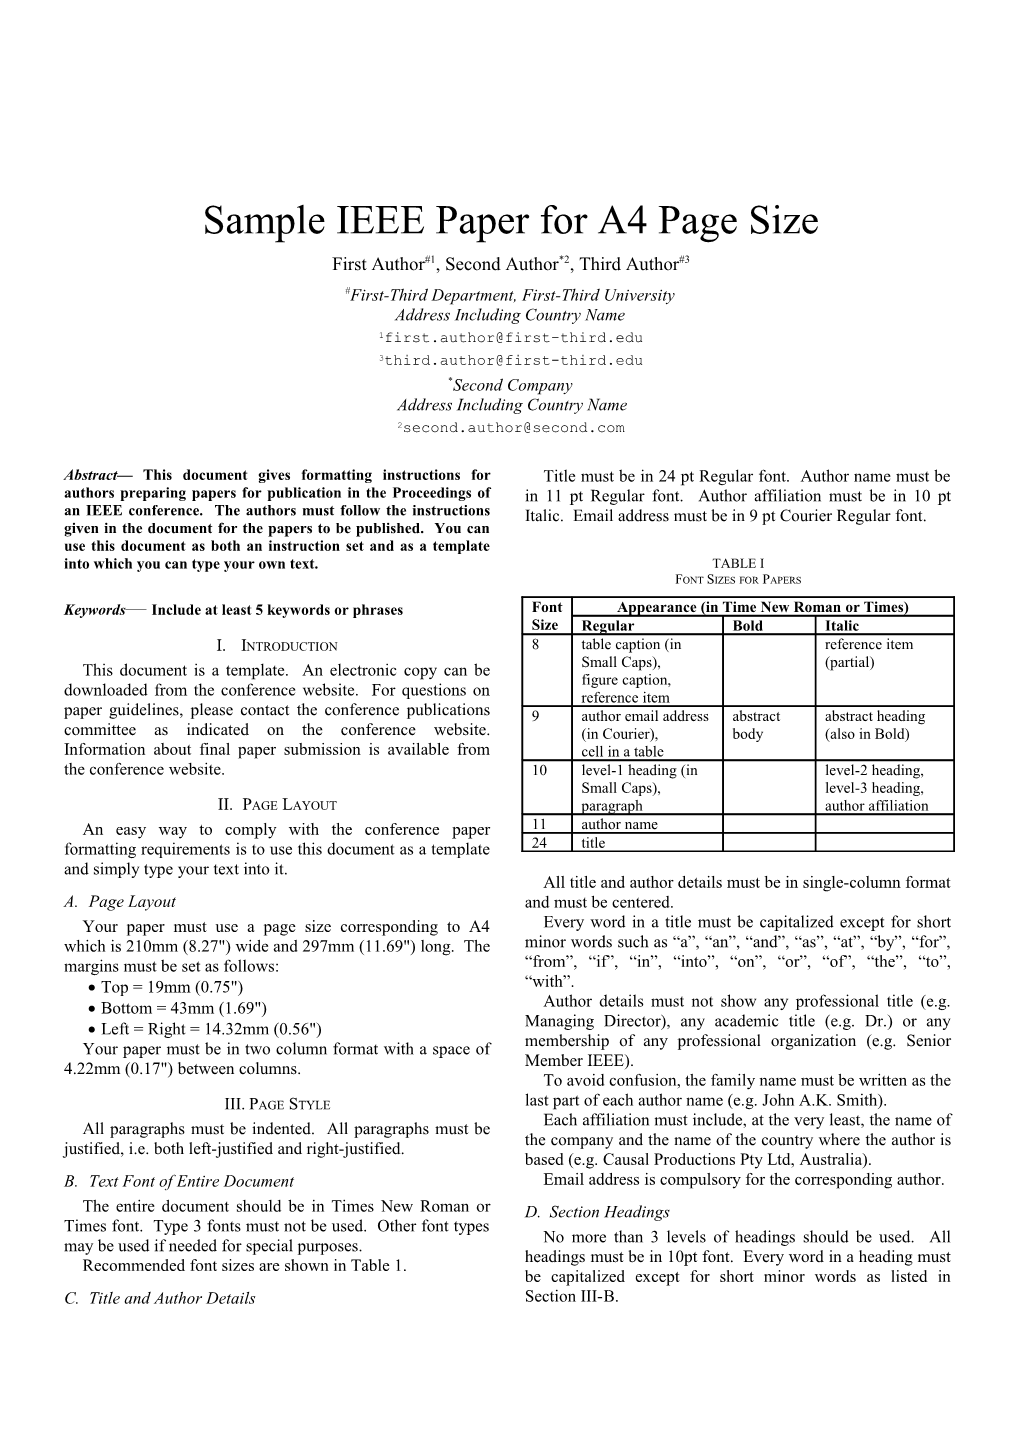 IEEE Paper Template in A4 (V1) s6